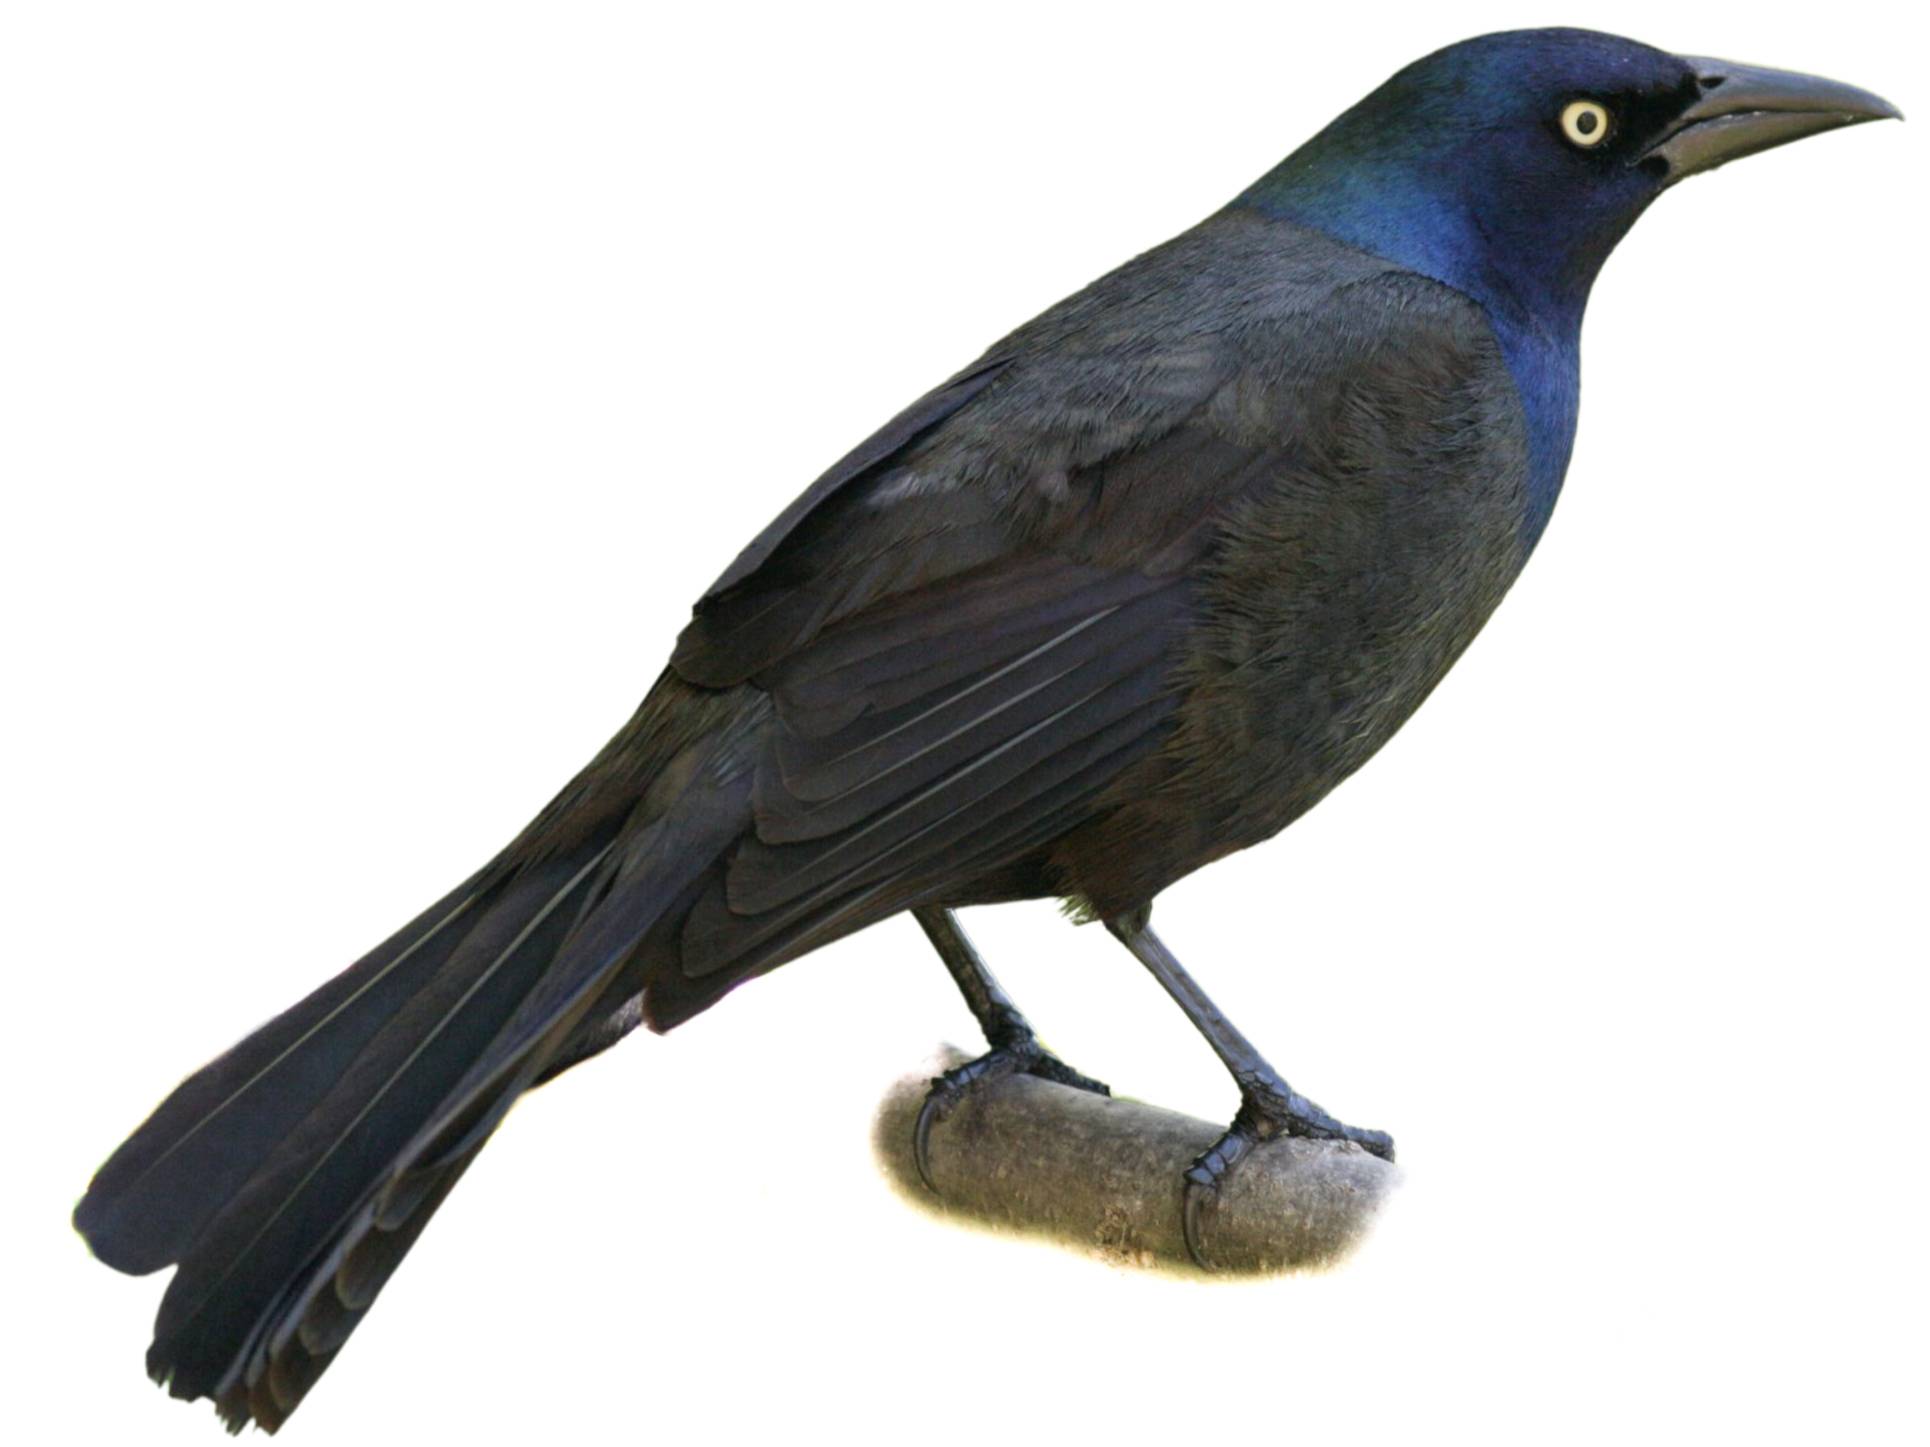 A photo of a Common Grackle (Quiscalus quiscula), male